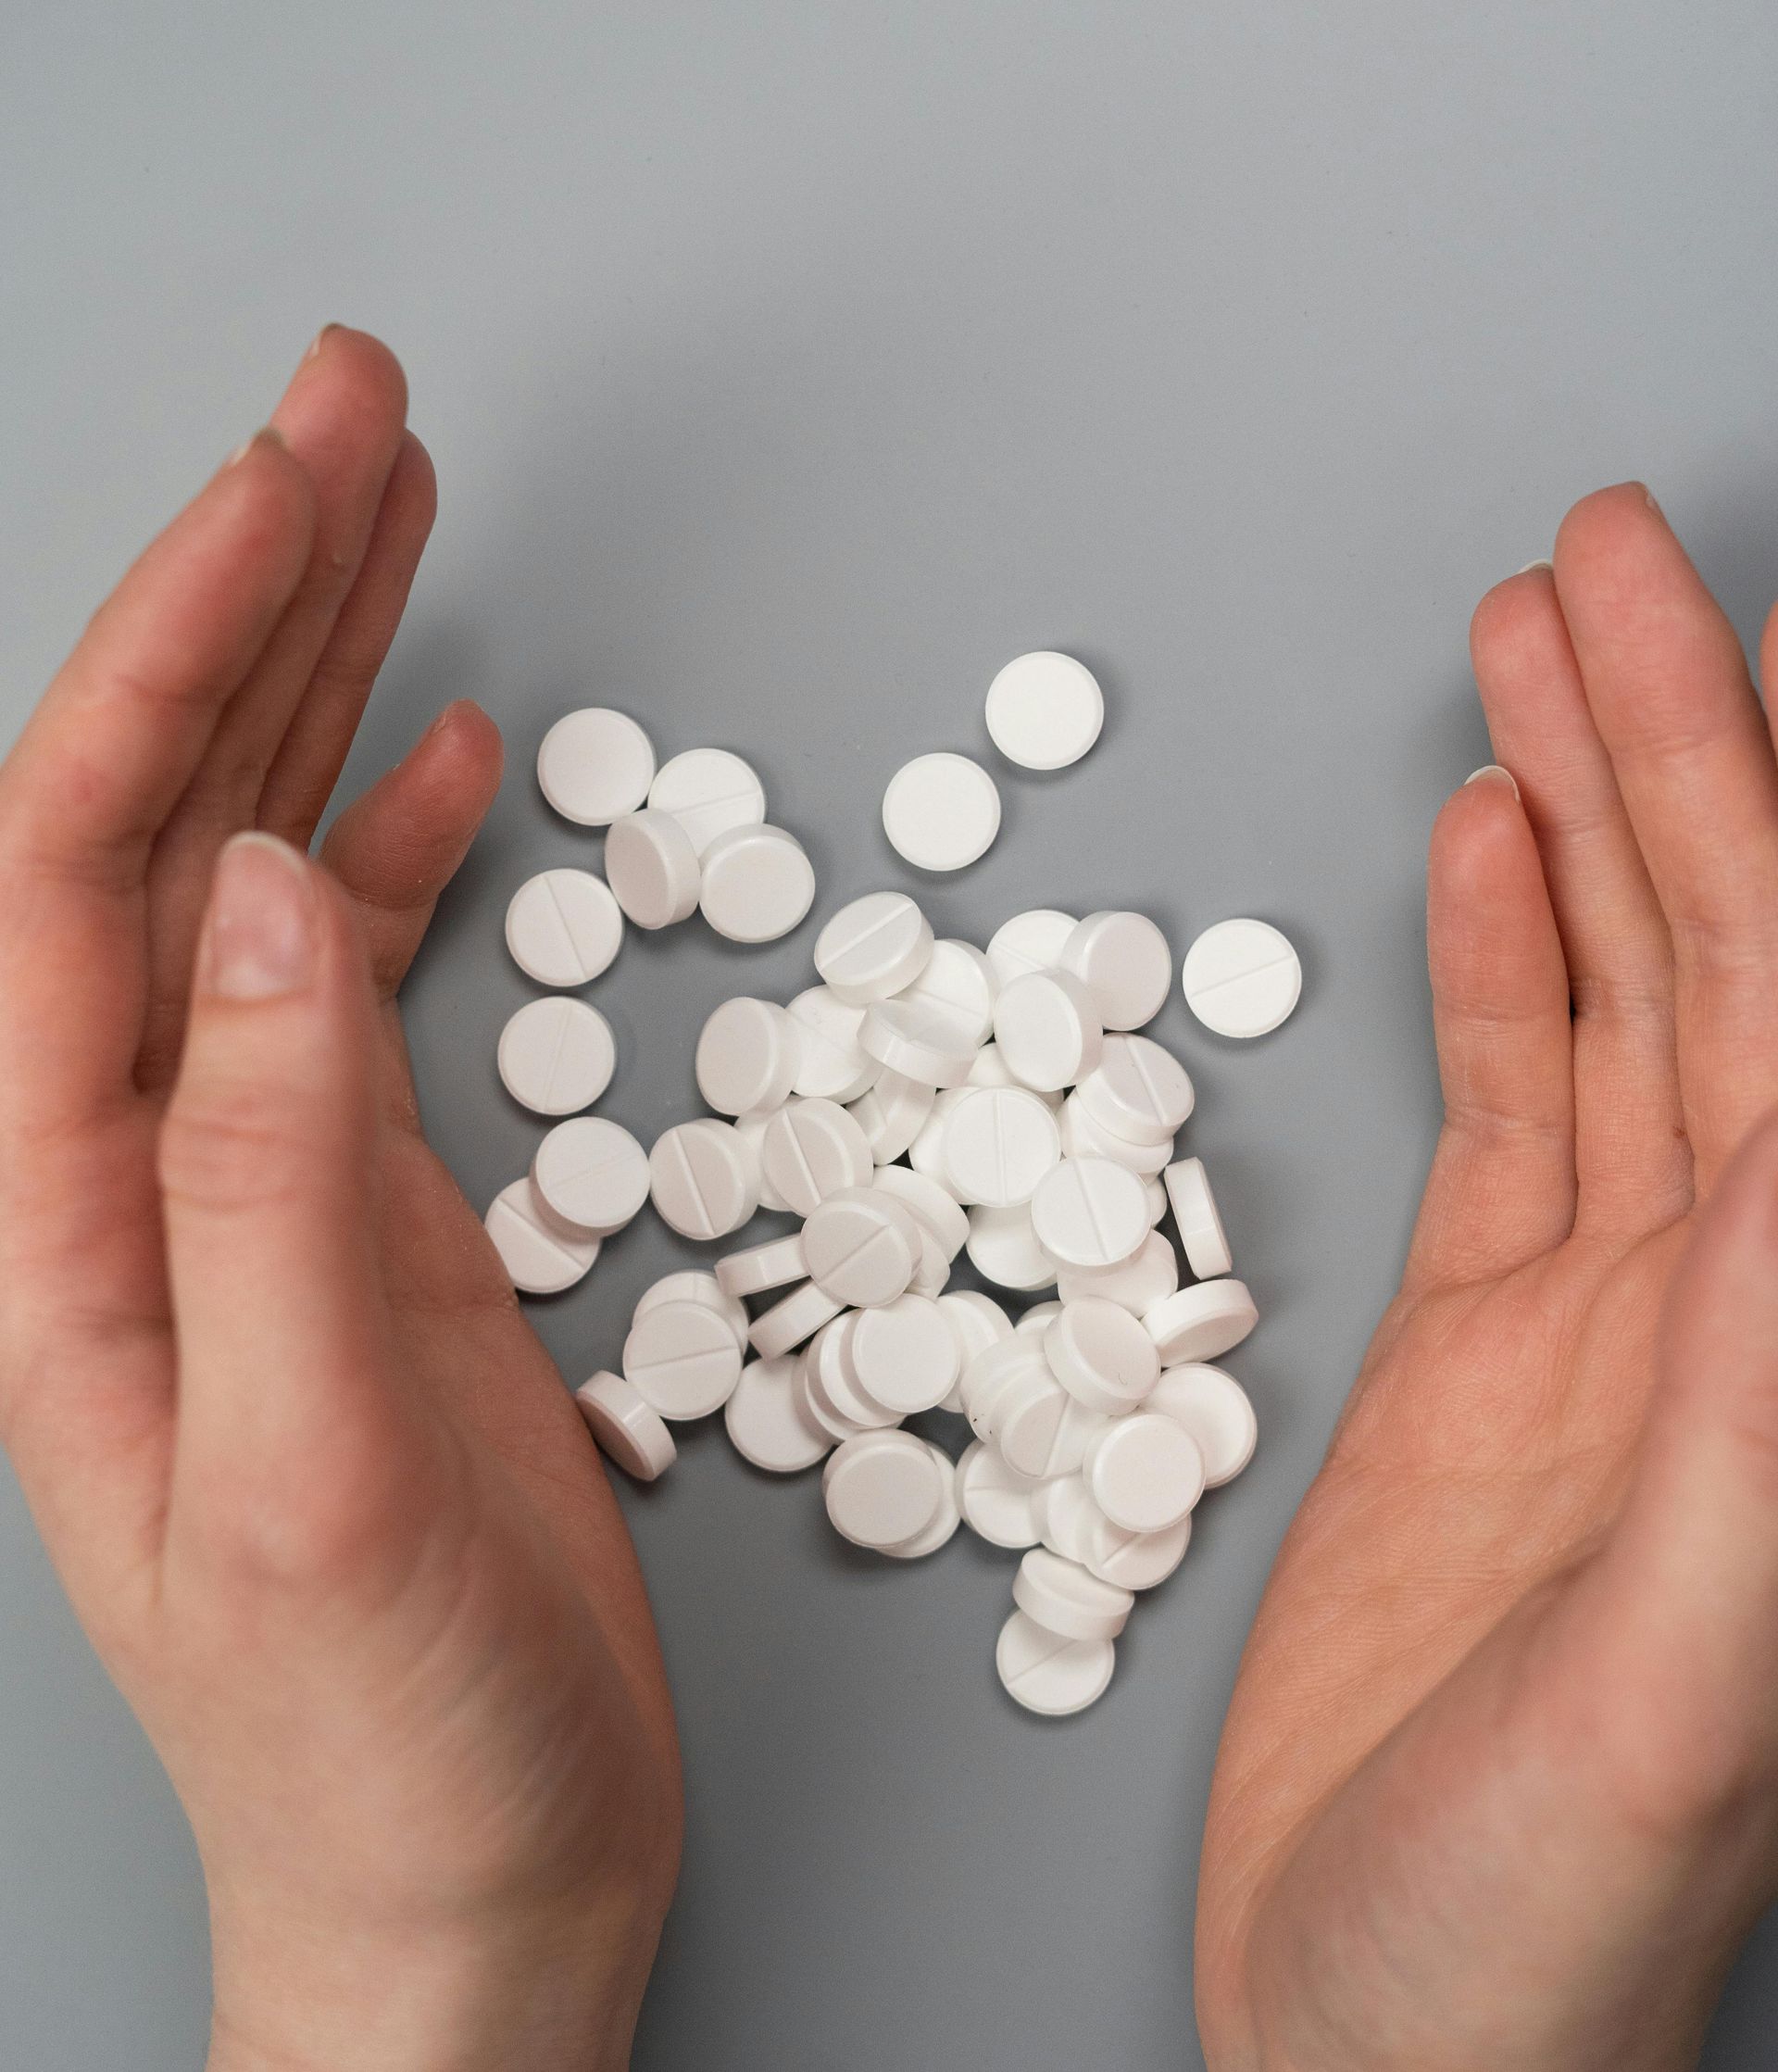 a person is holding a pile of white pills in their hands